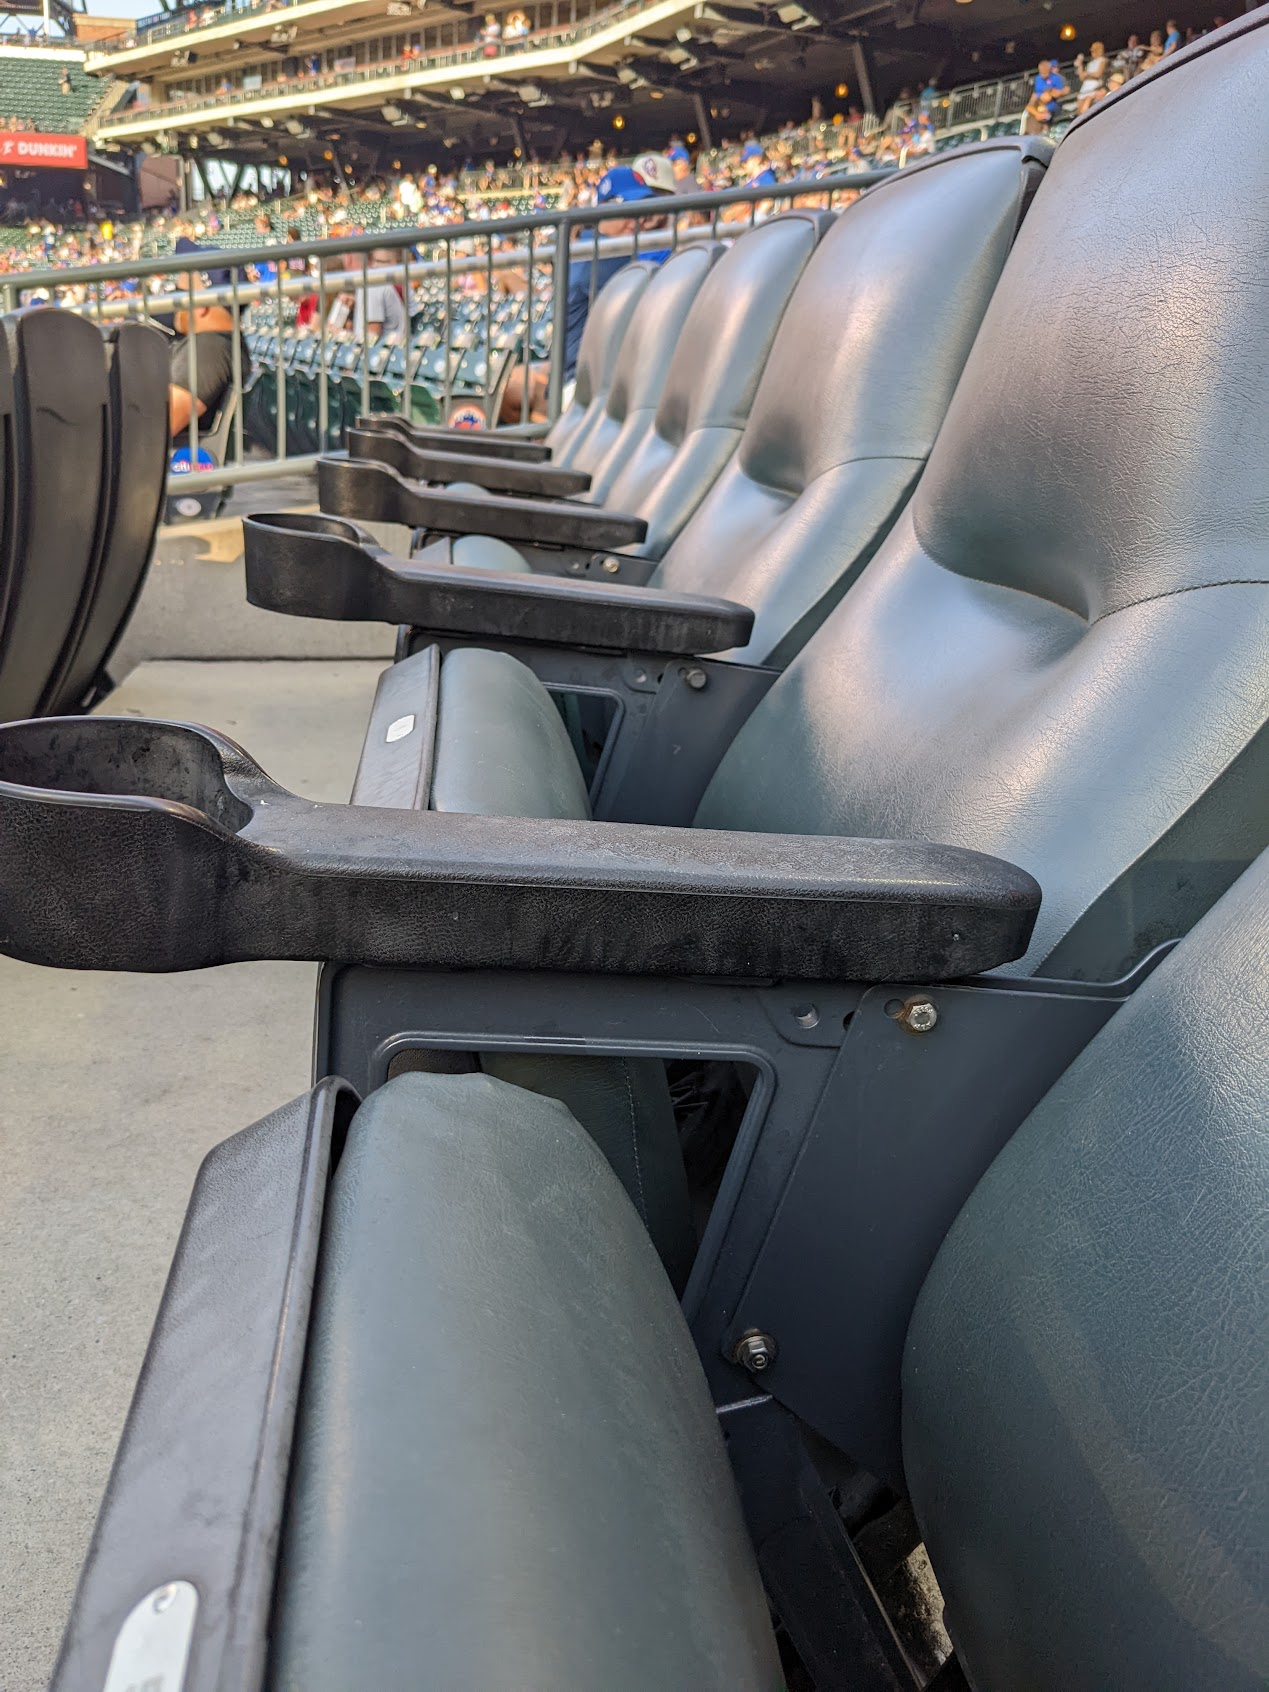 a row of seats in a stadium